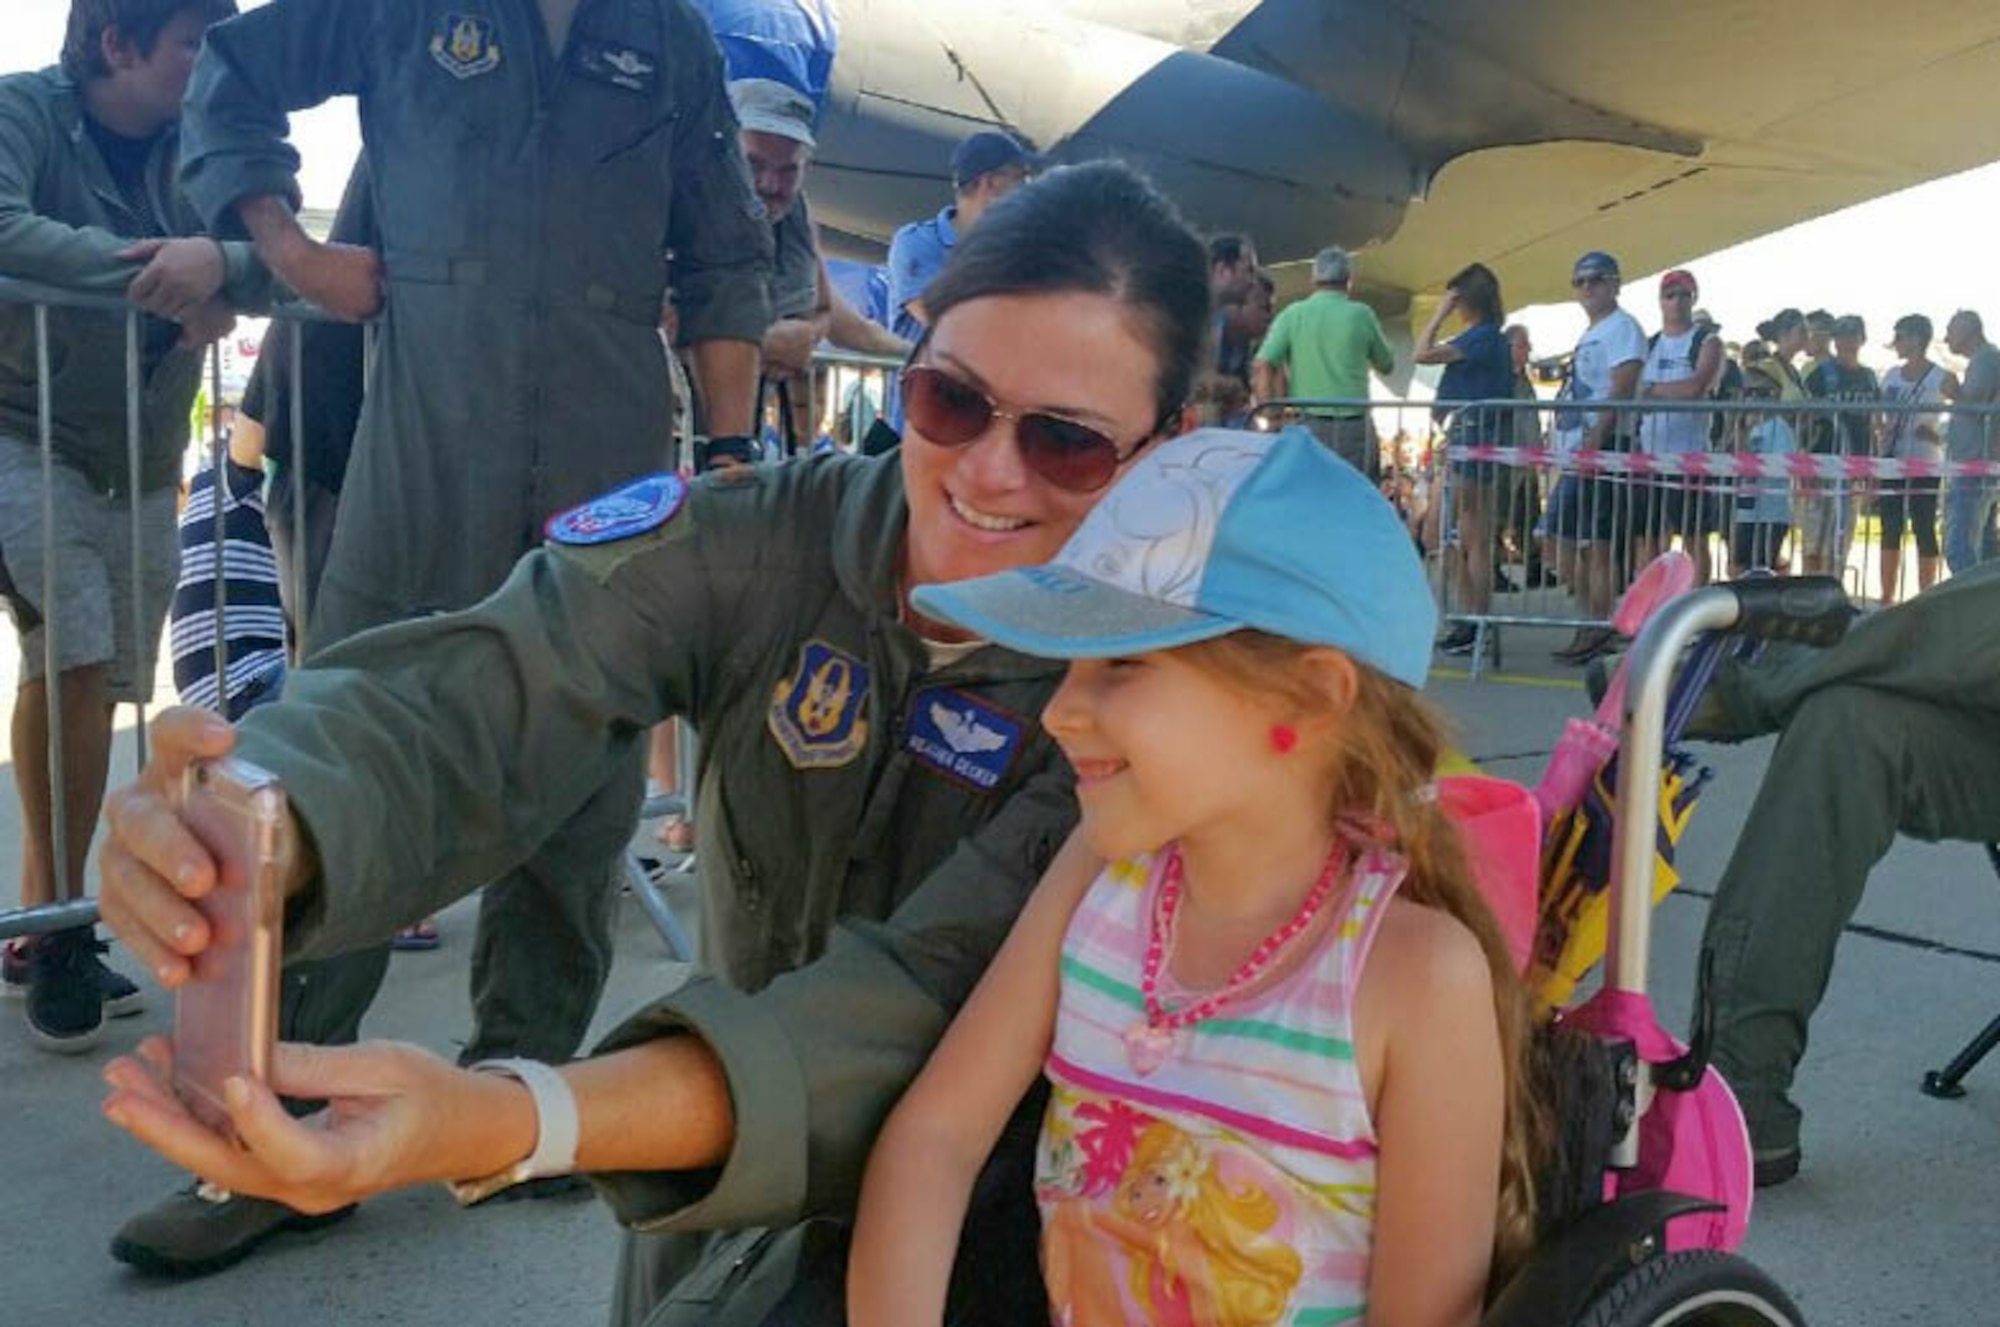 U.S. Air Force Maj. Heather Decker, a B-52 Stratofortress aircrew member with the 93rd Bomb Squadron, takes a selfie with a Slovak girl on Aug. 27, 2016 during the Slovak International Air Fest held in Sliač, Slovakia. The air show featured displays and aerial demonstrations with aircraft from across Europe and Asia; the B-52, from the Reserve 307th Bomb Wing, was the only U.S. representative at the event and was voted the best static display for the event. (U.S. Air Force photo by Master Sgt. Andrew Branning/Released)